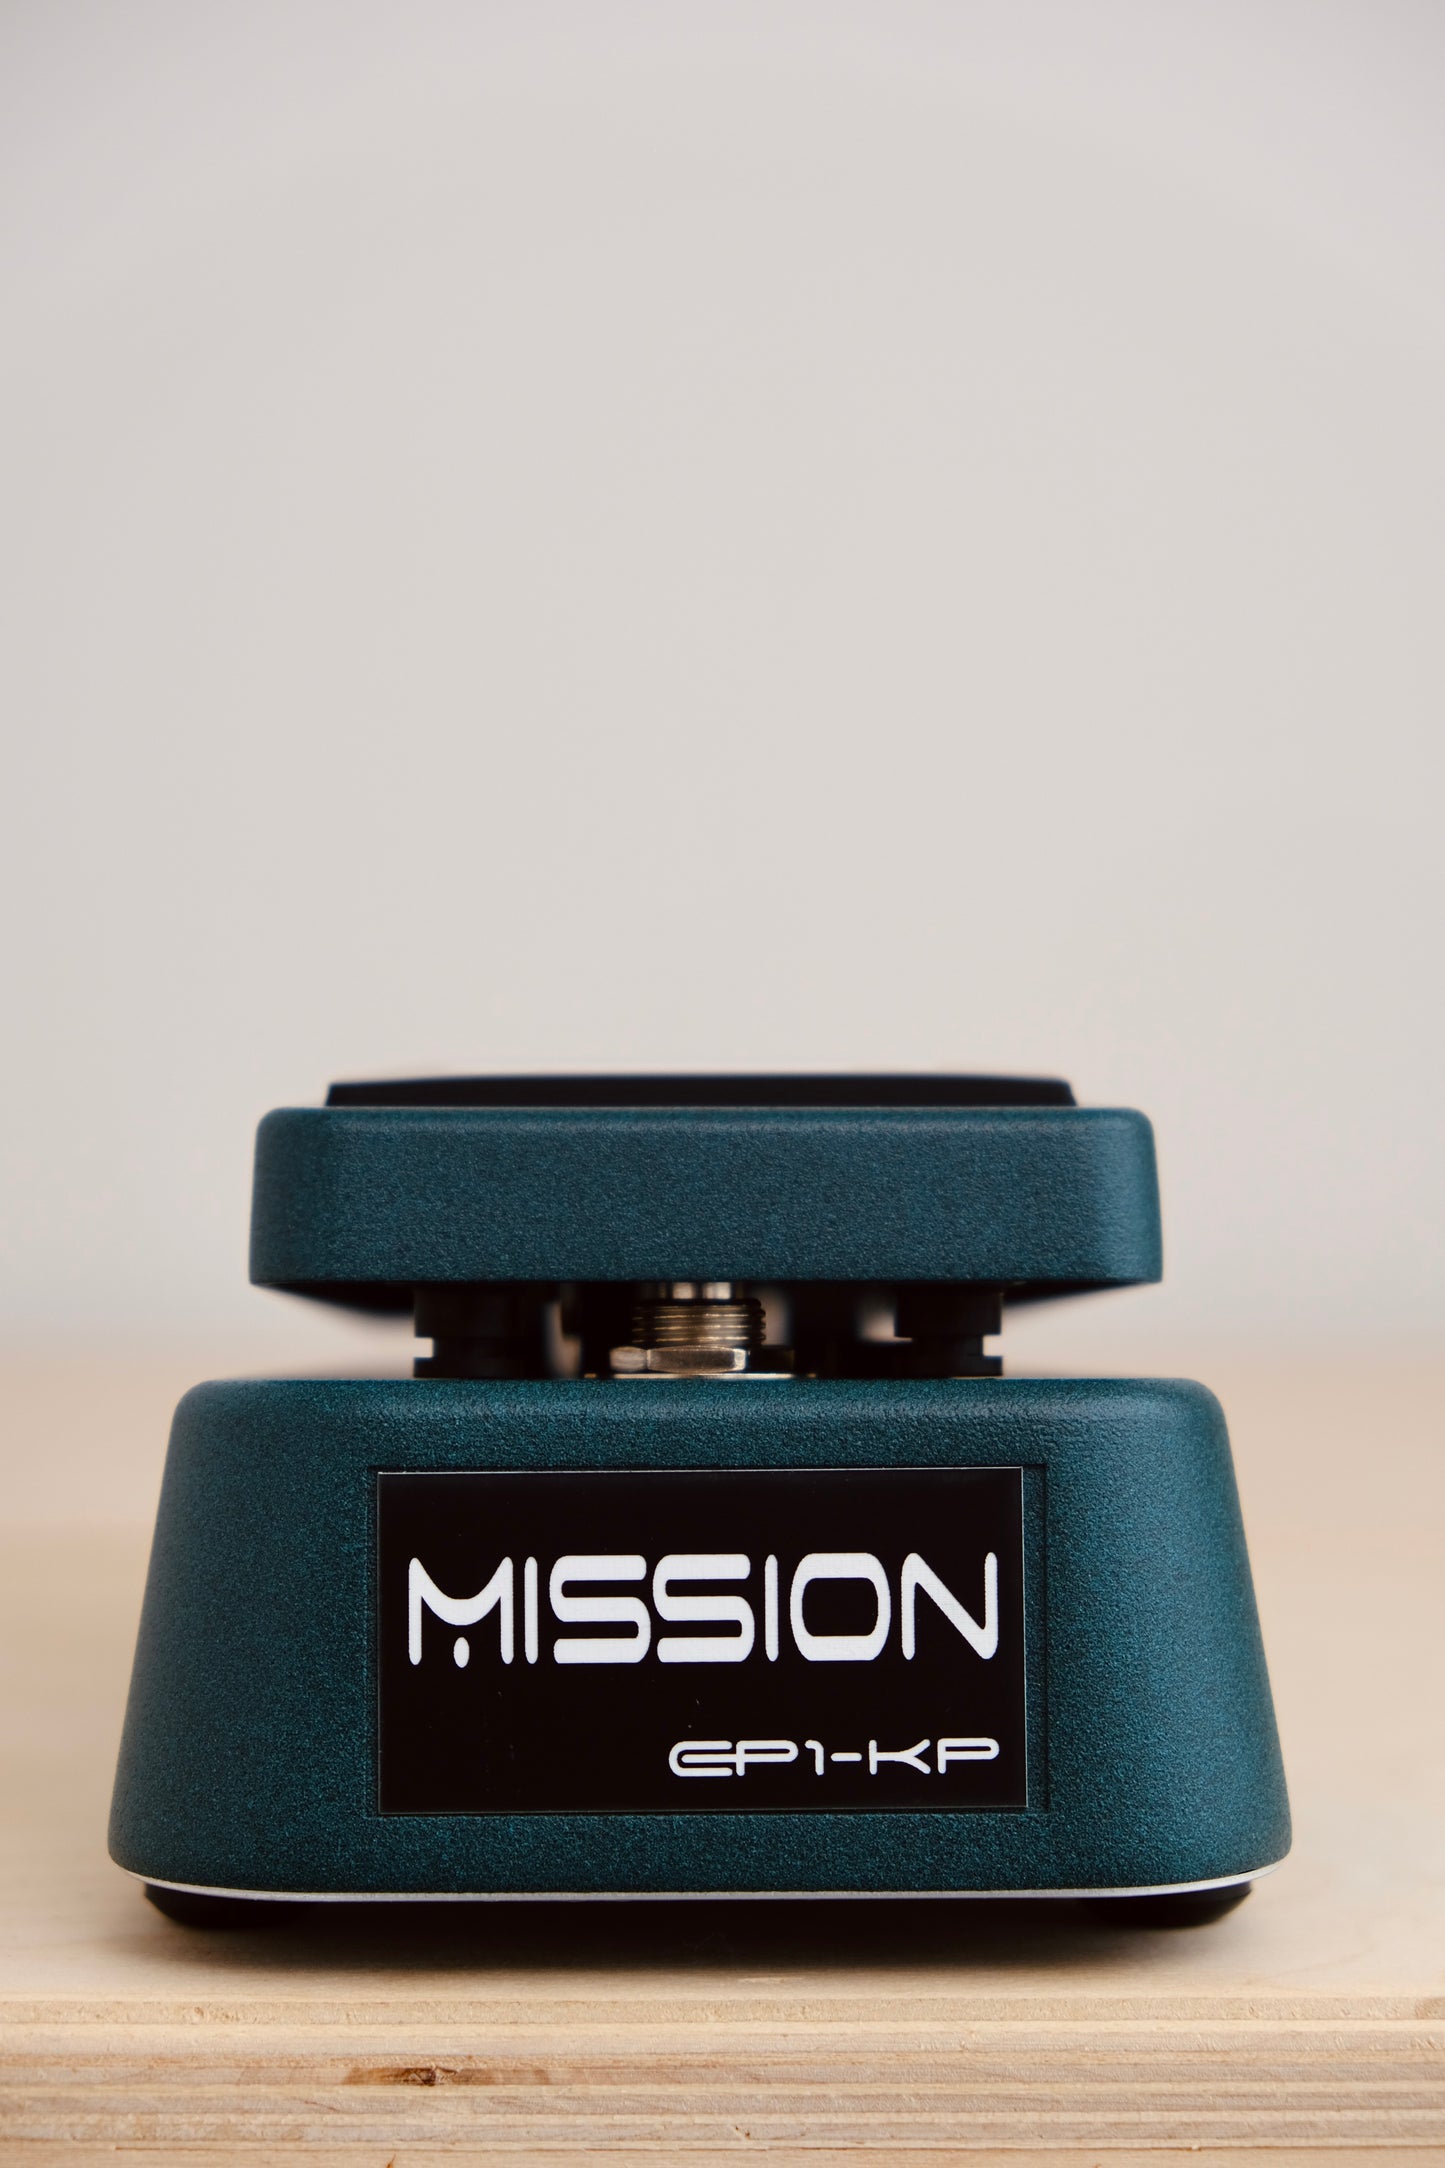 Mission Engineering EP1-KP-GN KEMPER Expression Pedal